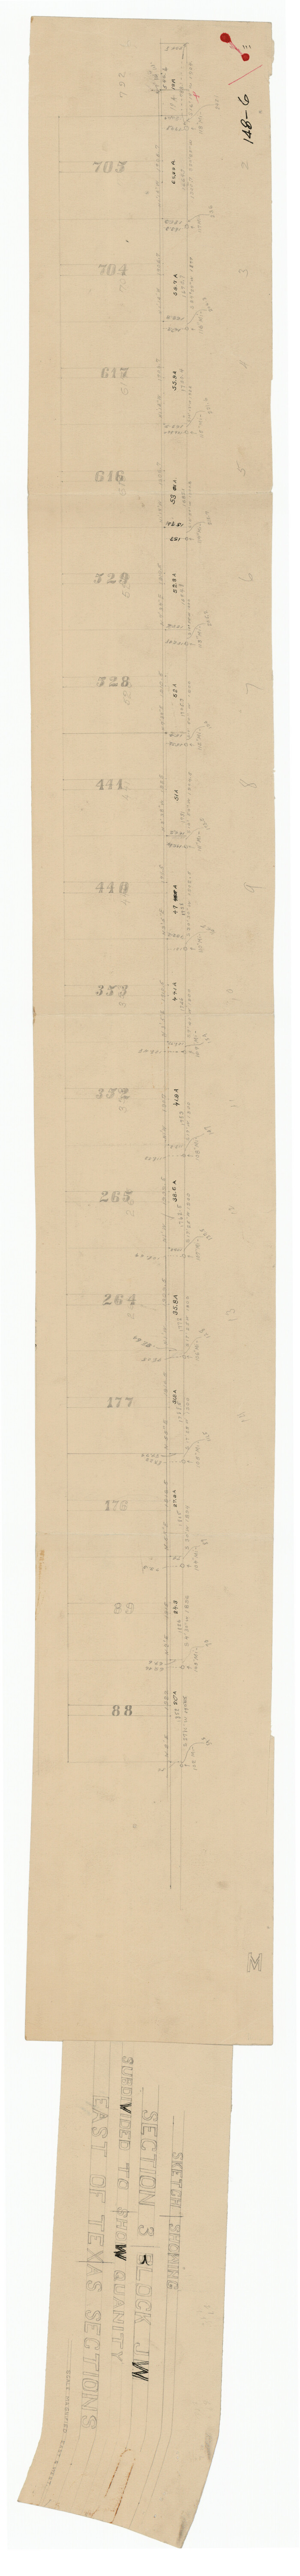 91303, Sketch Showing Section 3, Block JW, Subdivided to Show Quantity East of Texas Sections, Twichell Survey Records